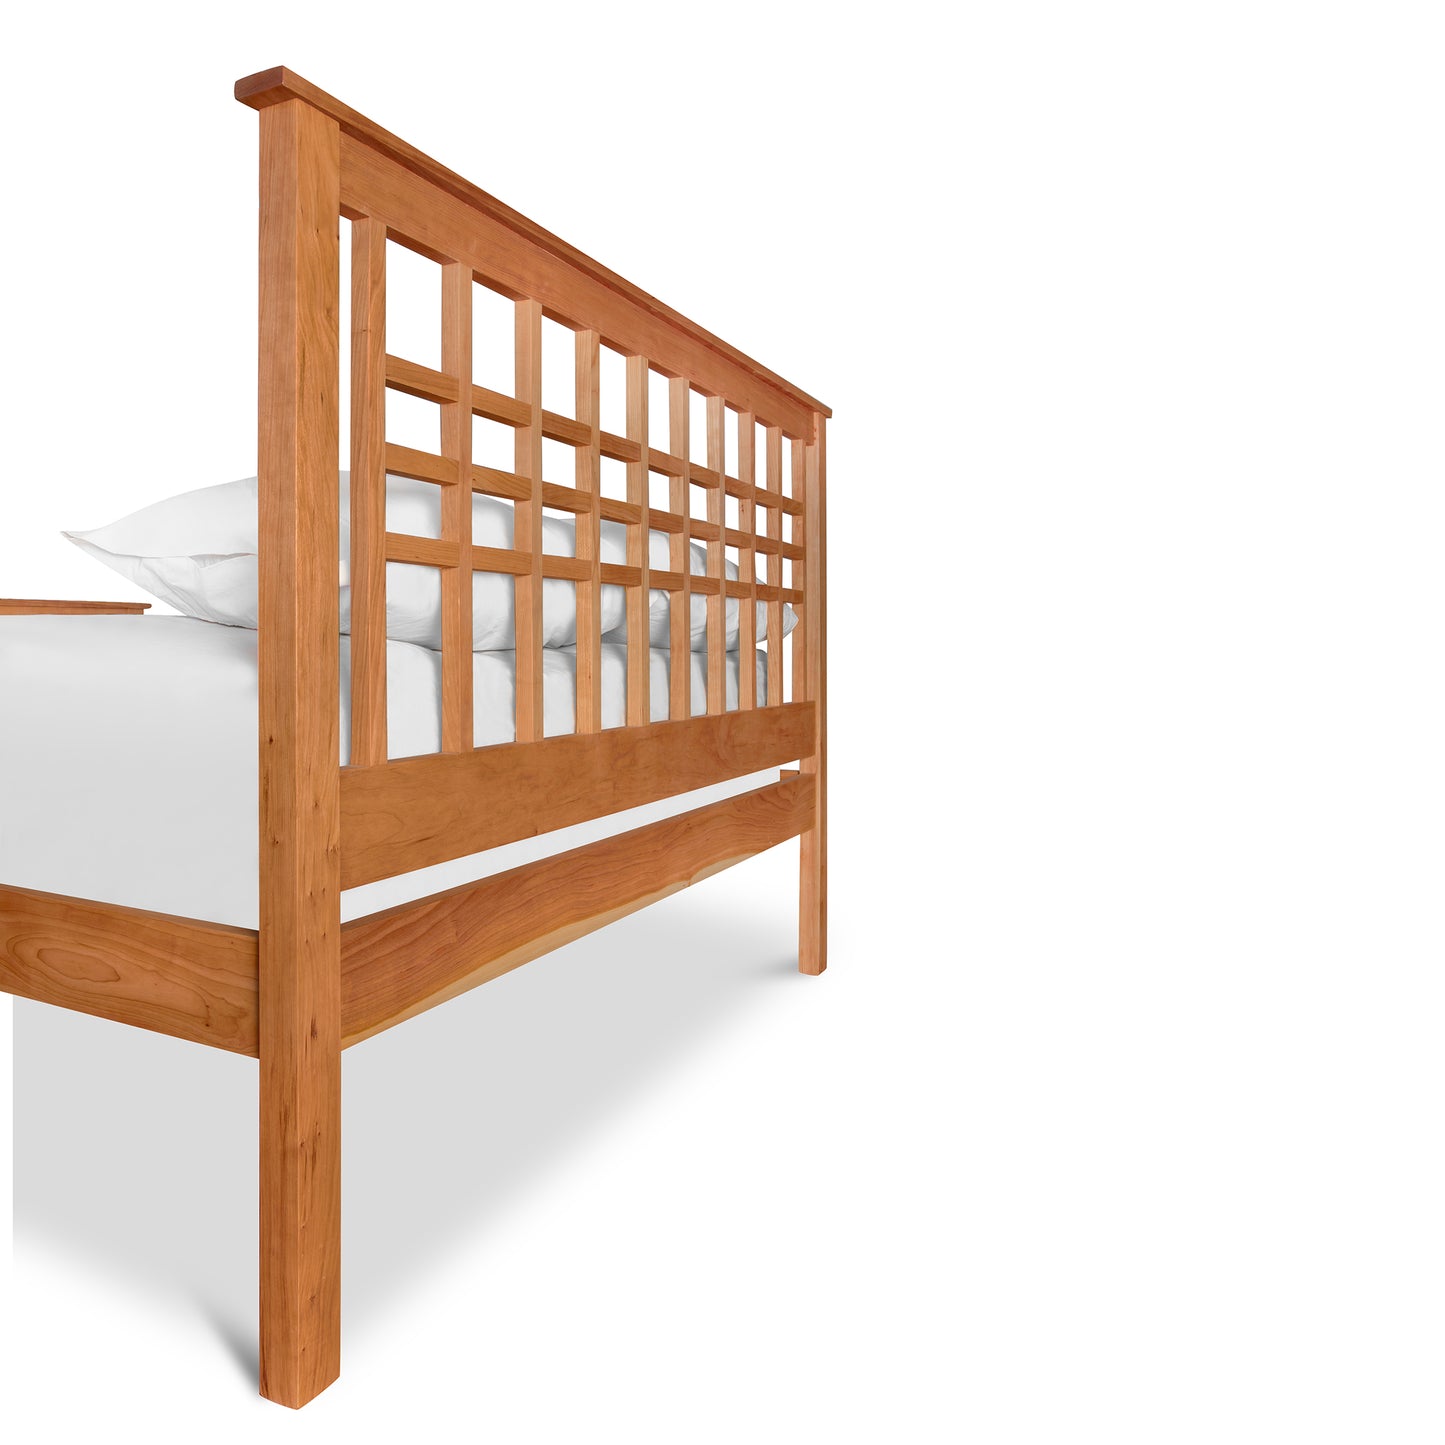 Solid cherry wood Modern Craftsman High Footboard Bed frame with a grid pattern headboard and white bedding on an isolated white background, finished with an eco-friendly oil by Vermont Furniture Designs.